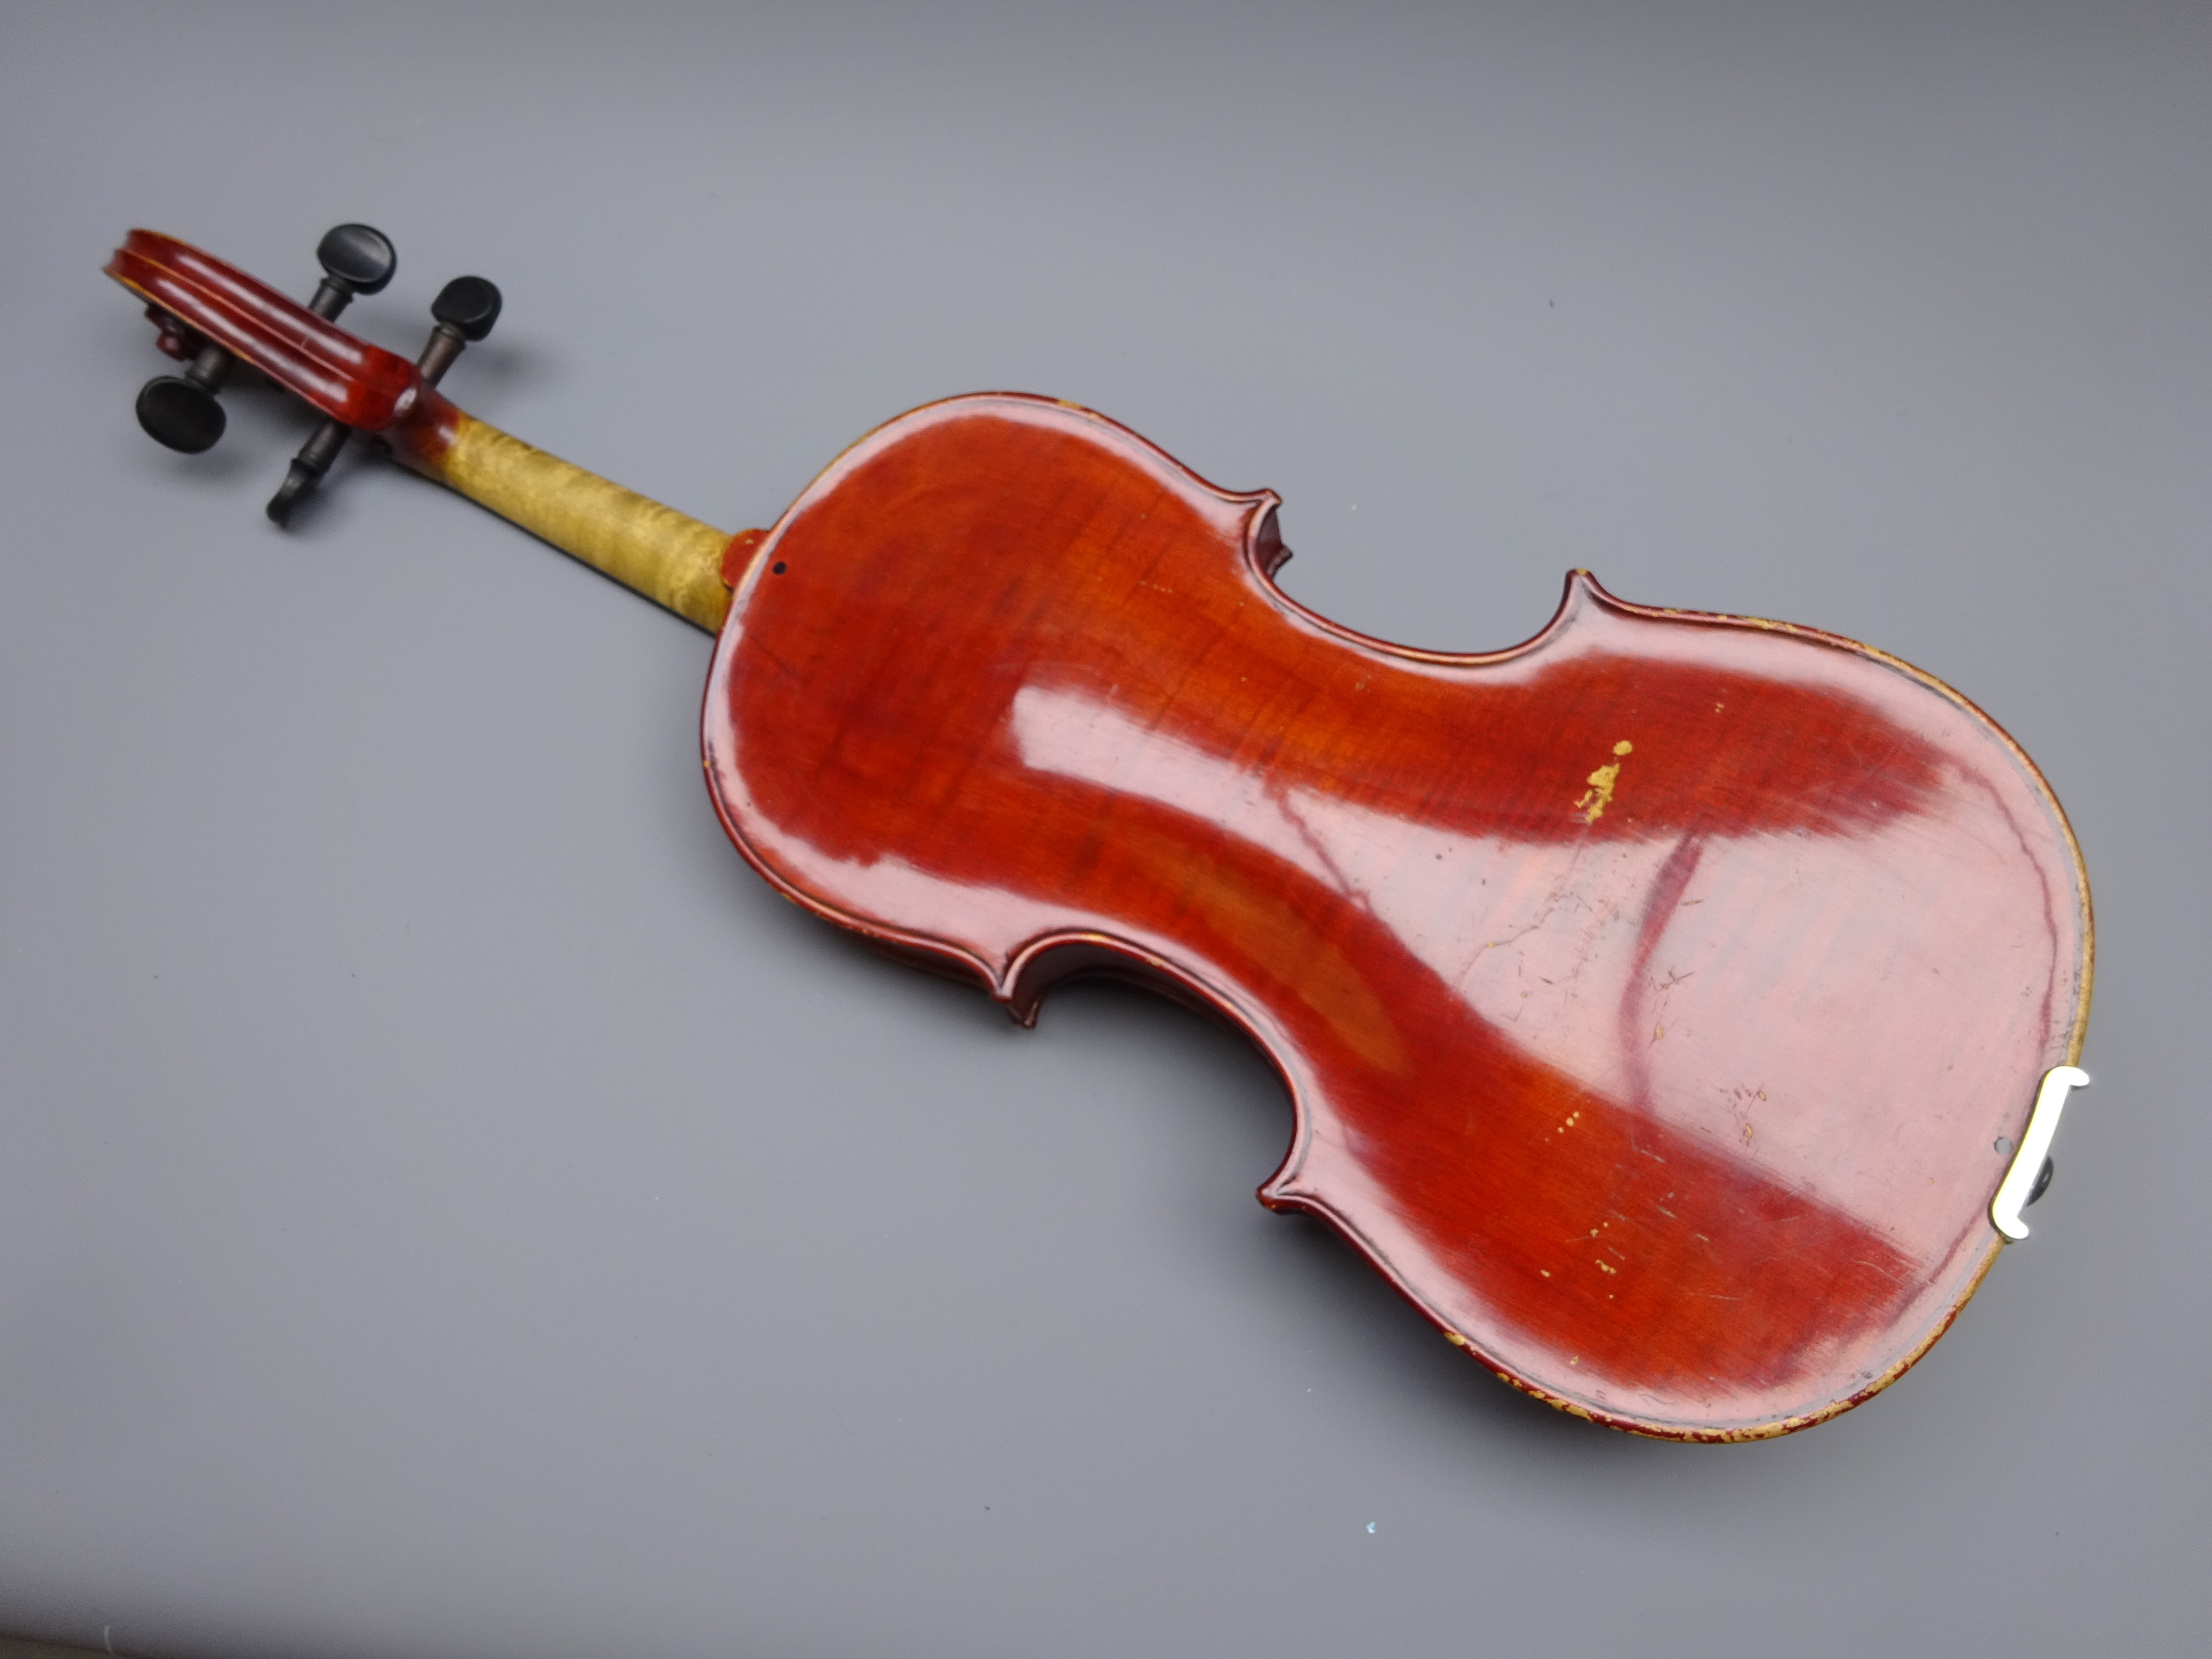 Early 20th century violin, French or German, with 36cm one-piece maple back and ribs and spruce top, - Image 9 of 9